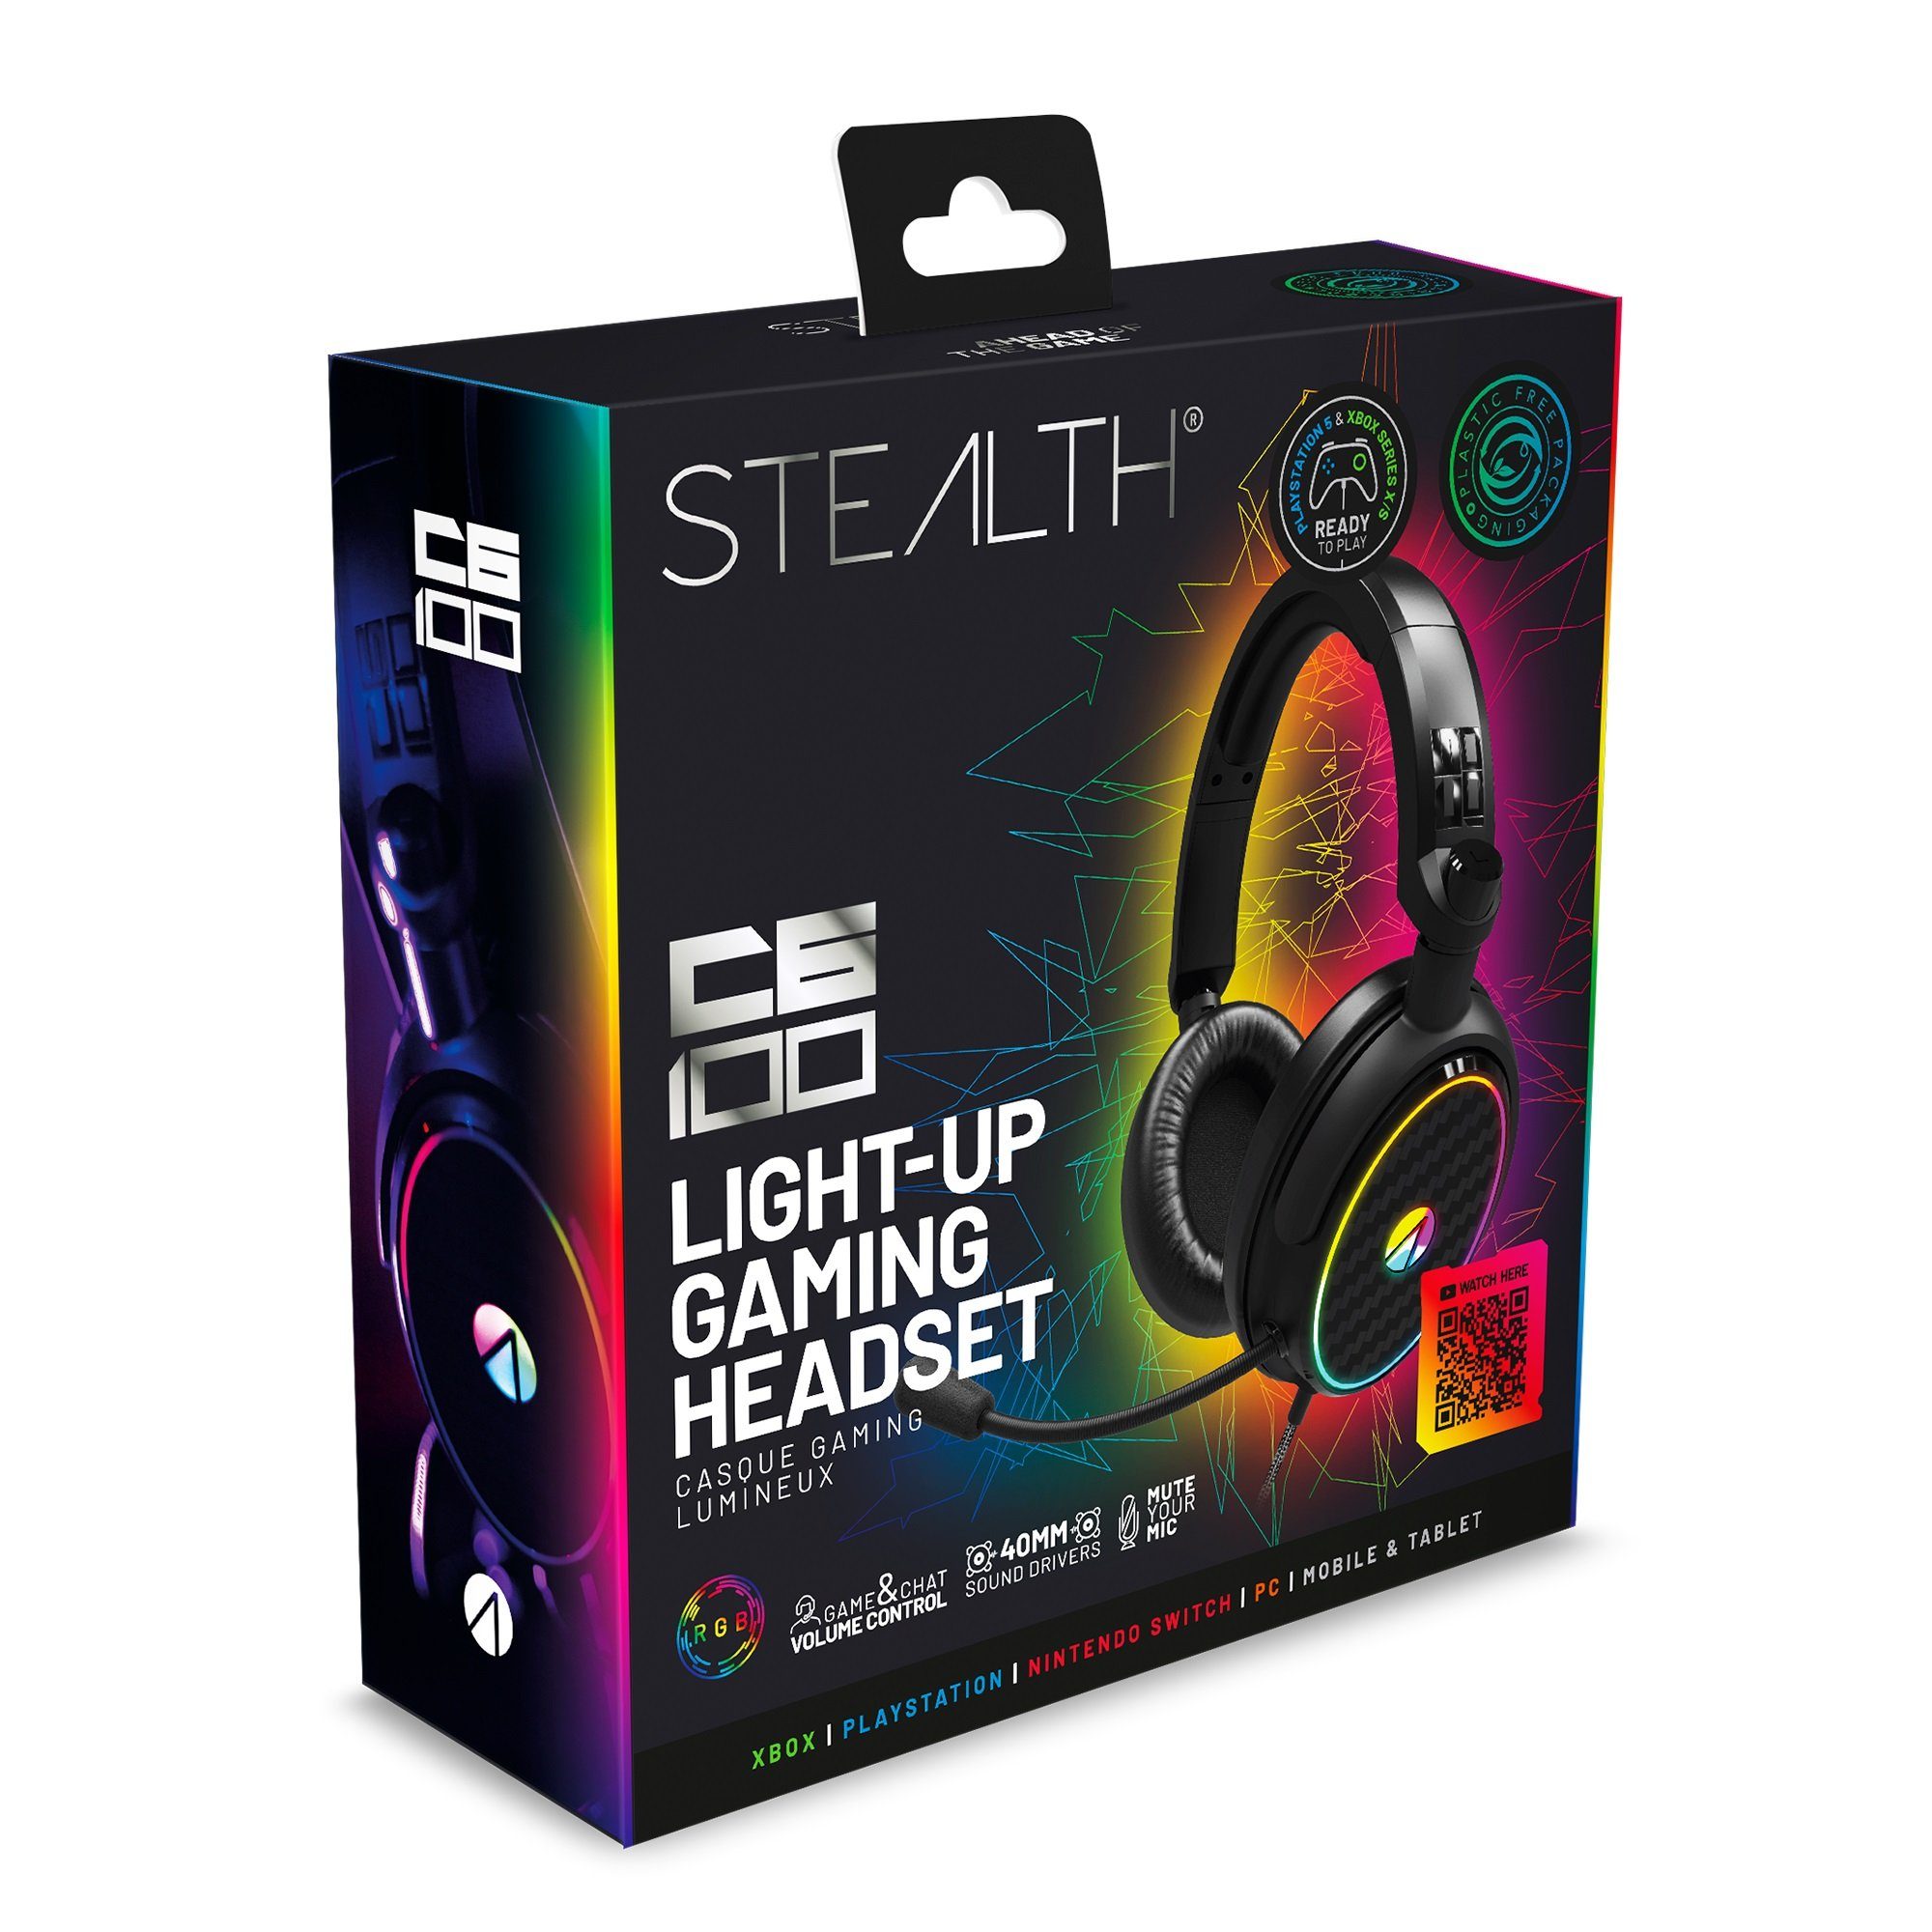 Stealth Stereo Gaming Headset C6-100 mit Verpackung) Beleuchtung Gaming-Headset (Plastikfreie LED